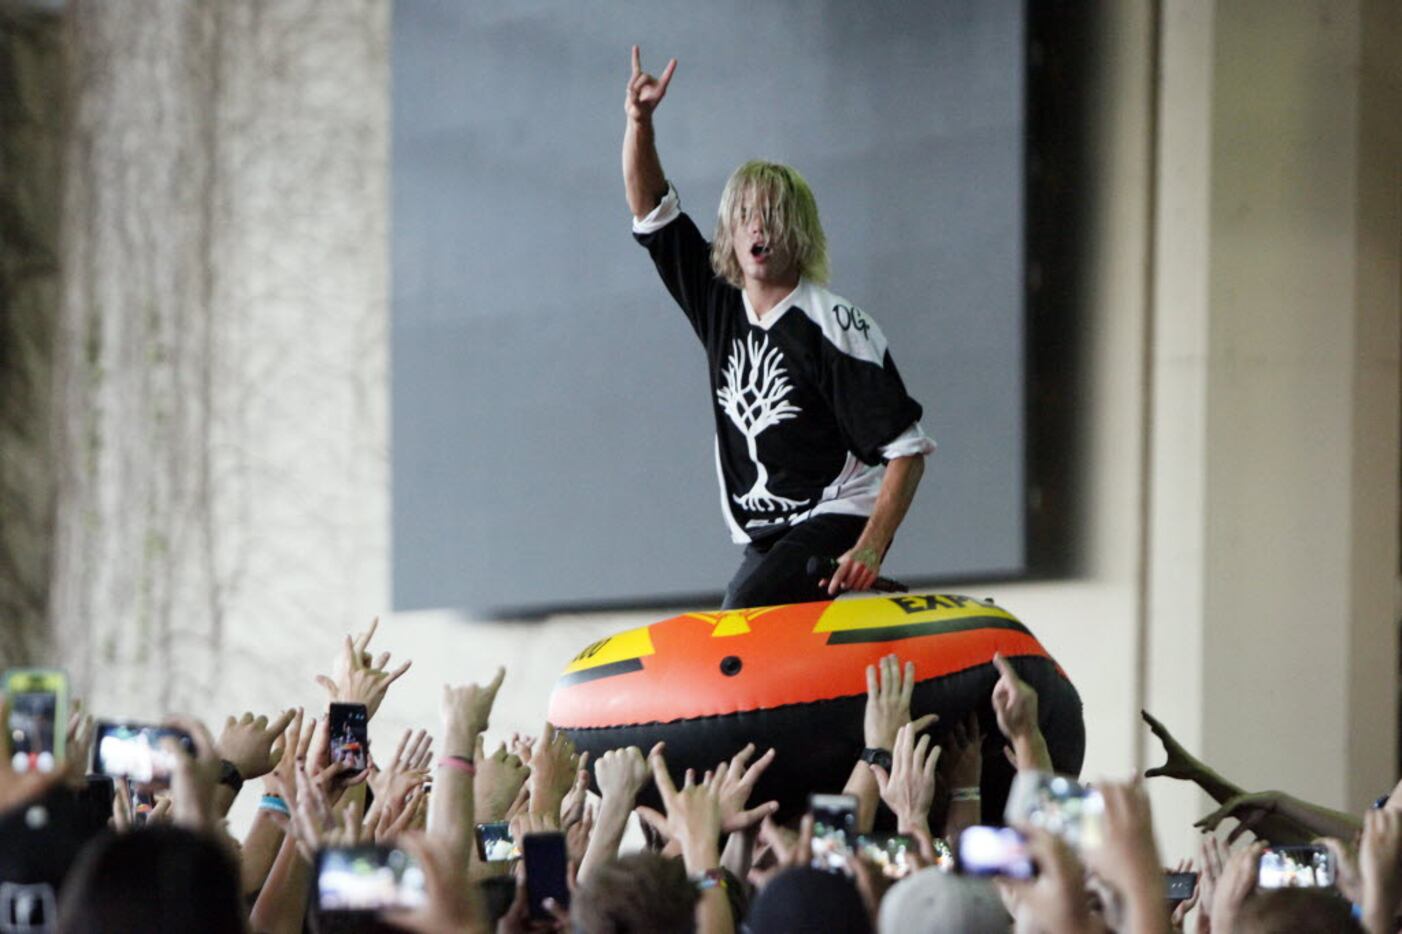 Lead singer Devin Oliver of the band I See Stars uses an inflatable raft to crowd surf...